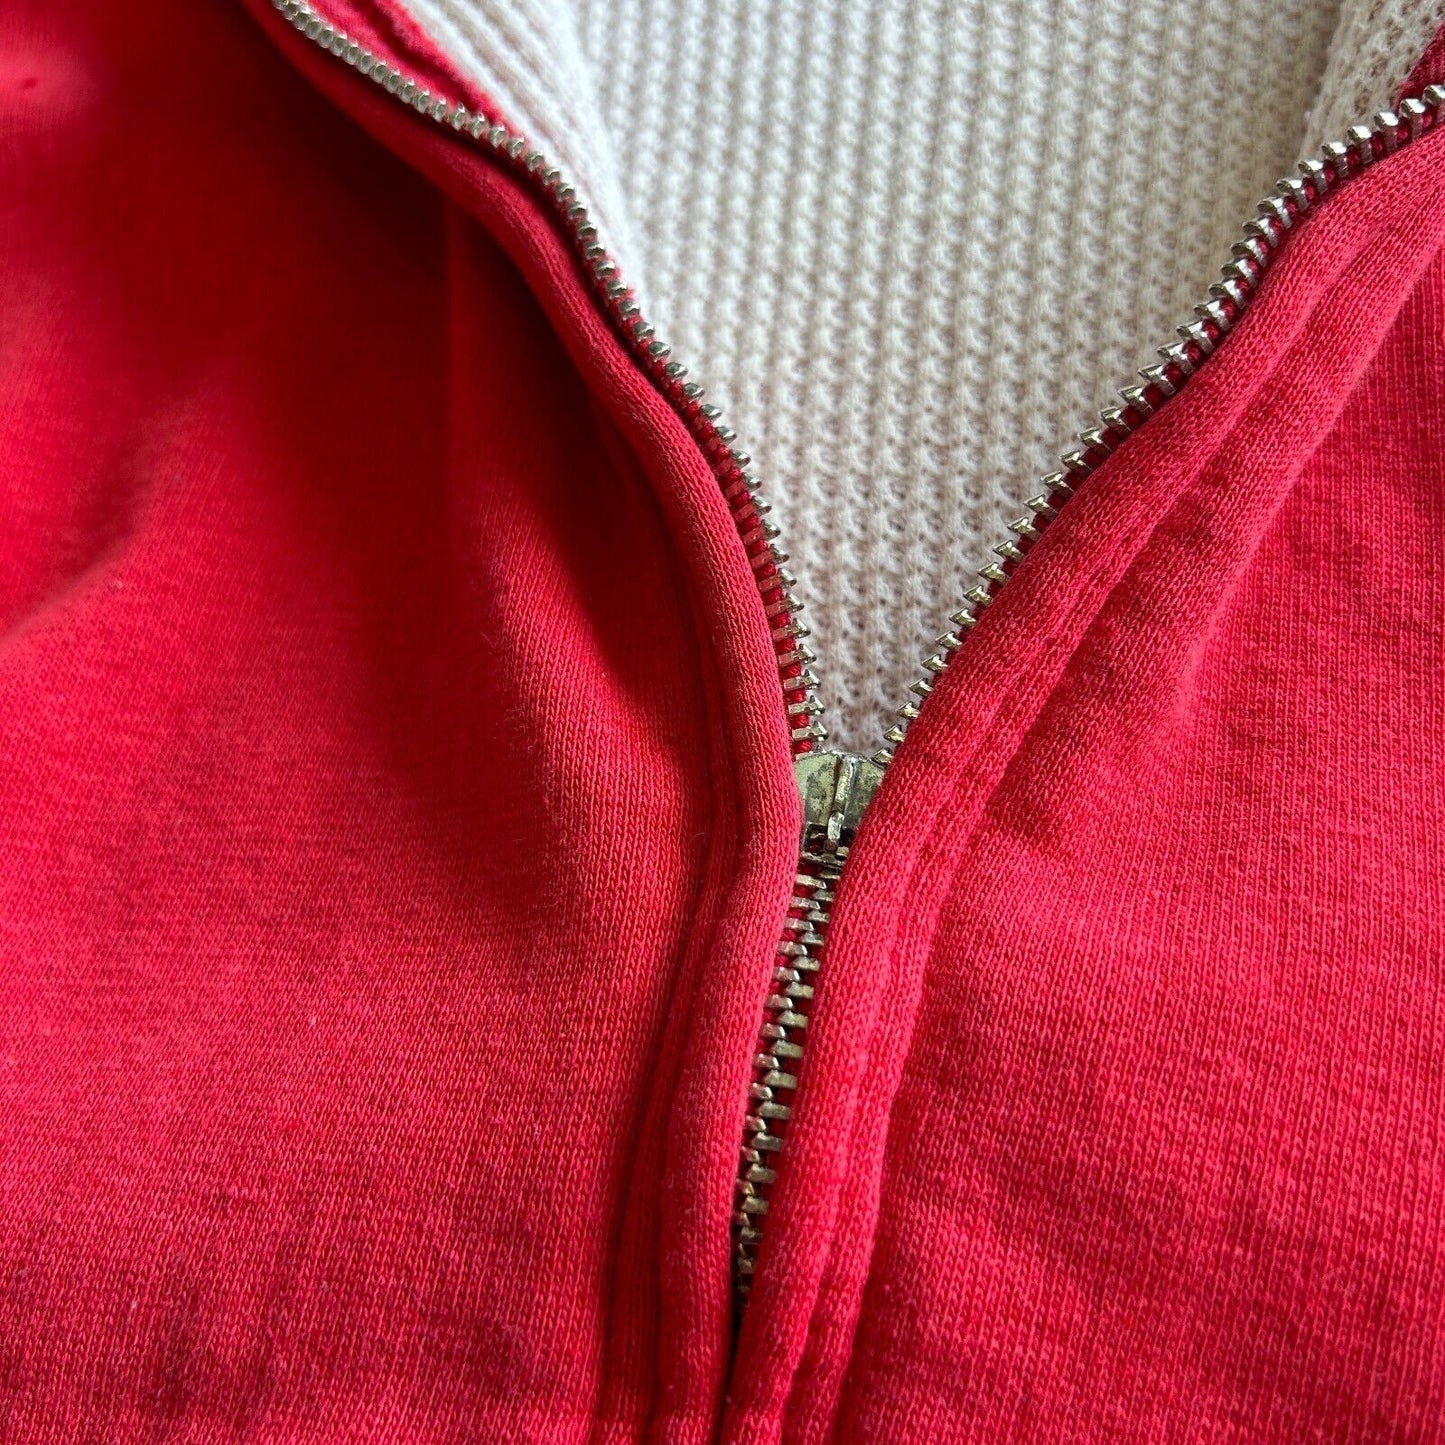 VINTAGE 60s 70s | Blank Red Thermal Lined Zip Up Hoodie Sweater sz S Adult